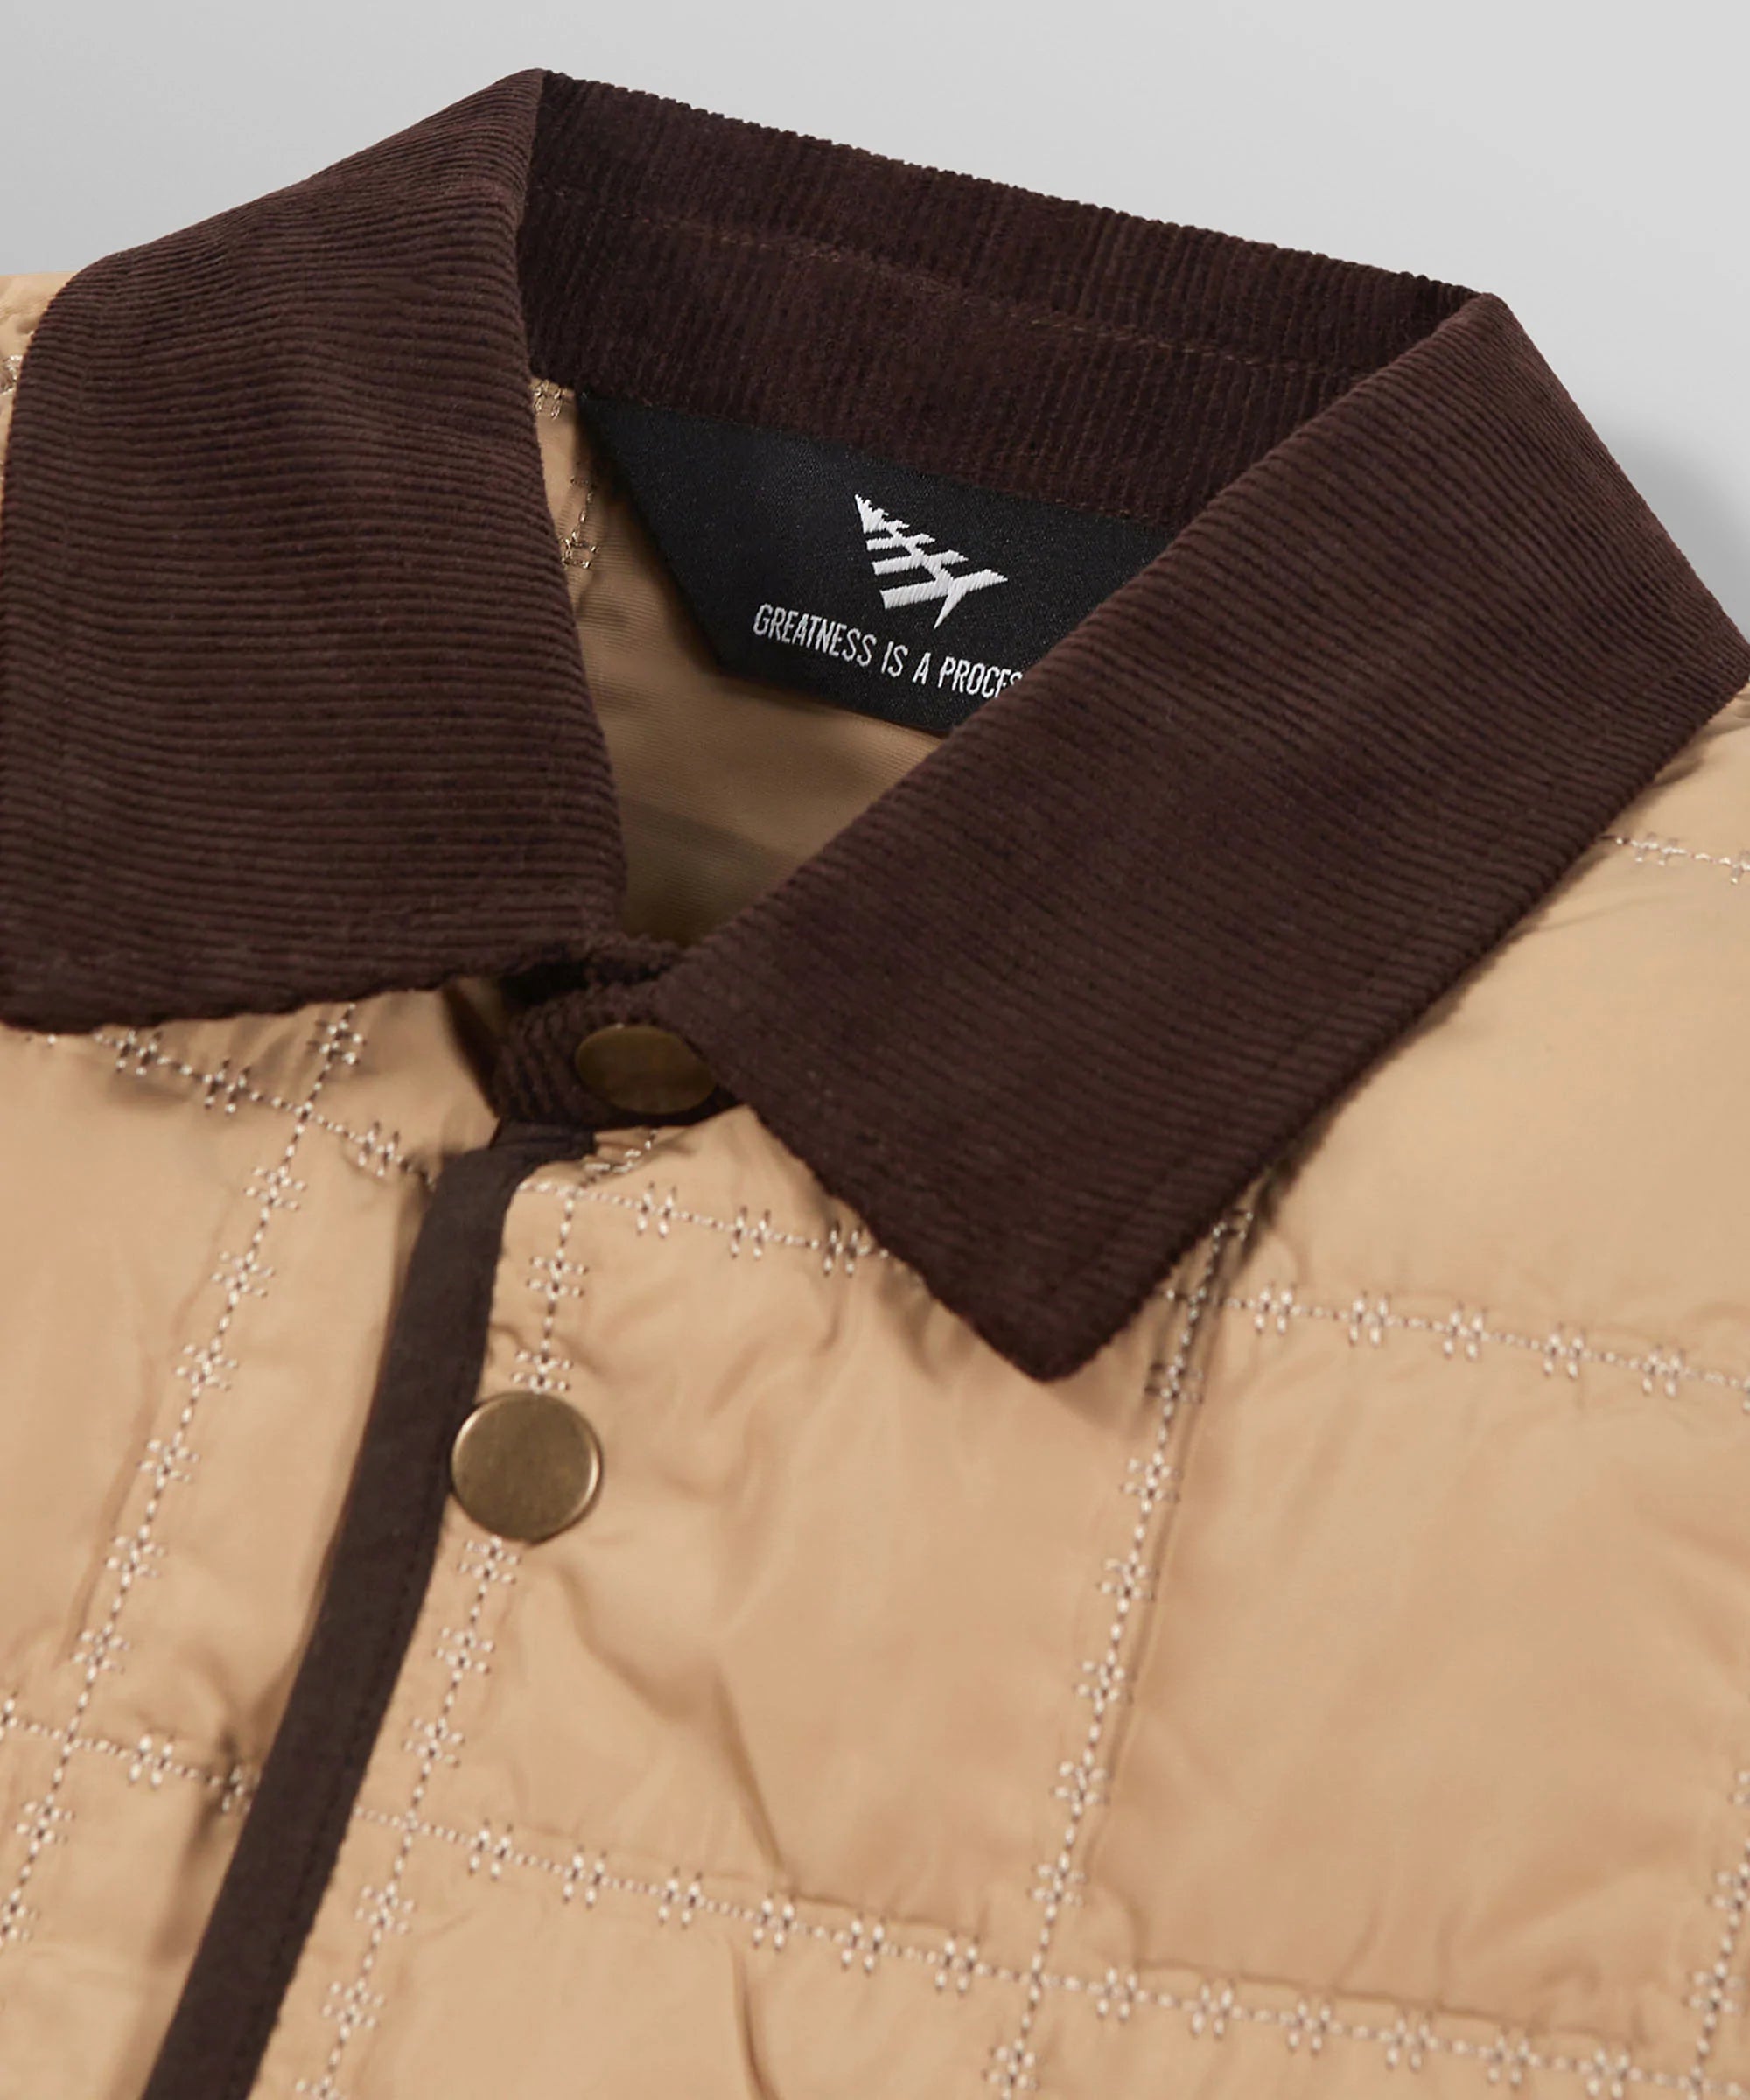 PAPER PLANES "QUILTED SHIRT" JACKET